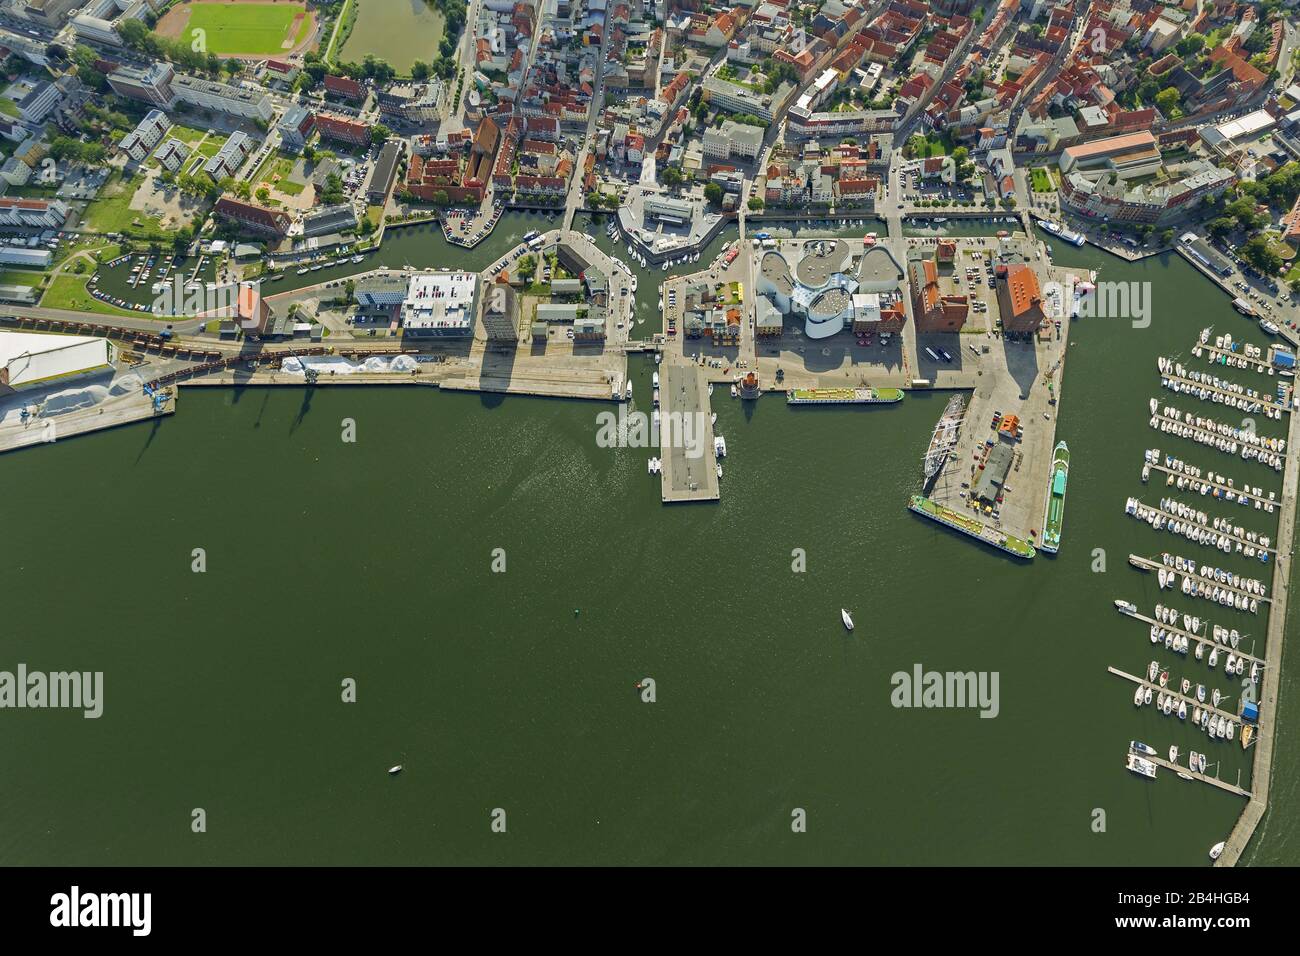 , Cityscape of Stralsund with harbor island with Ozeanum Oceanographic Museum, aerial view, 11.08.2012, Germany, Mecklenburg-Western Pomerania, Stralsund Stock Photo